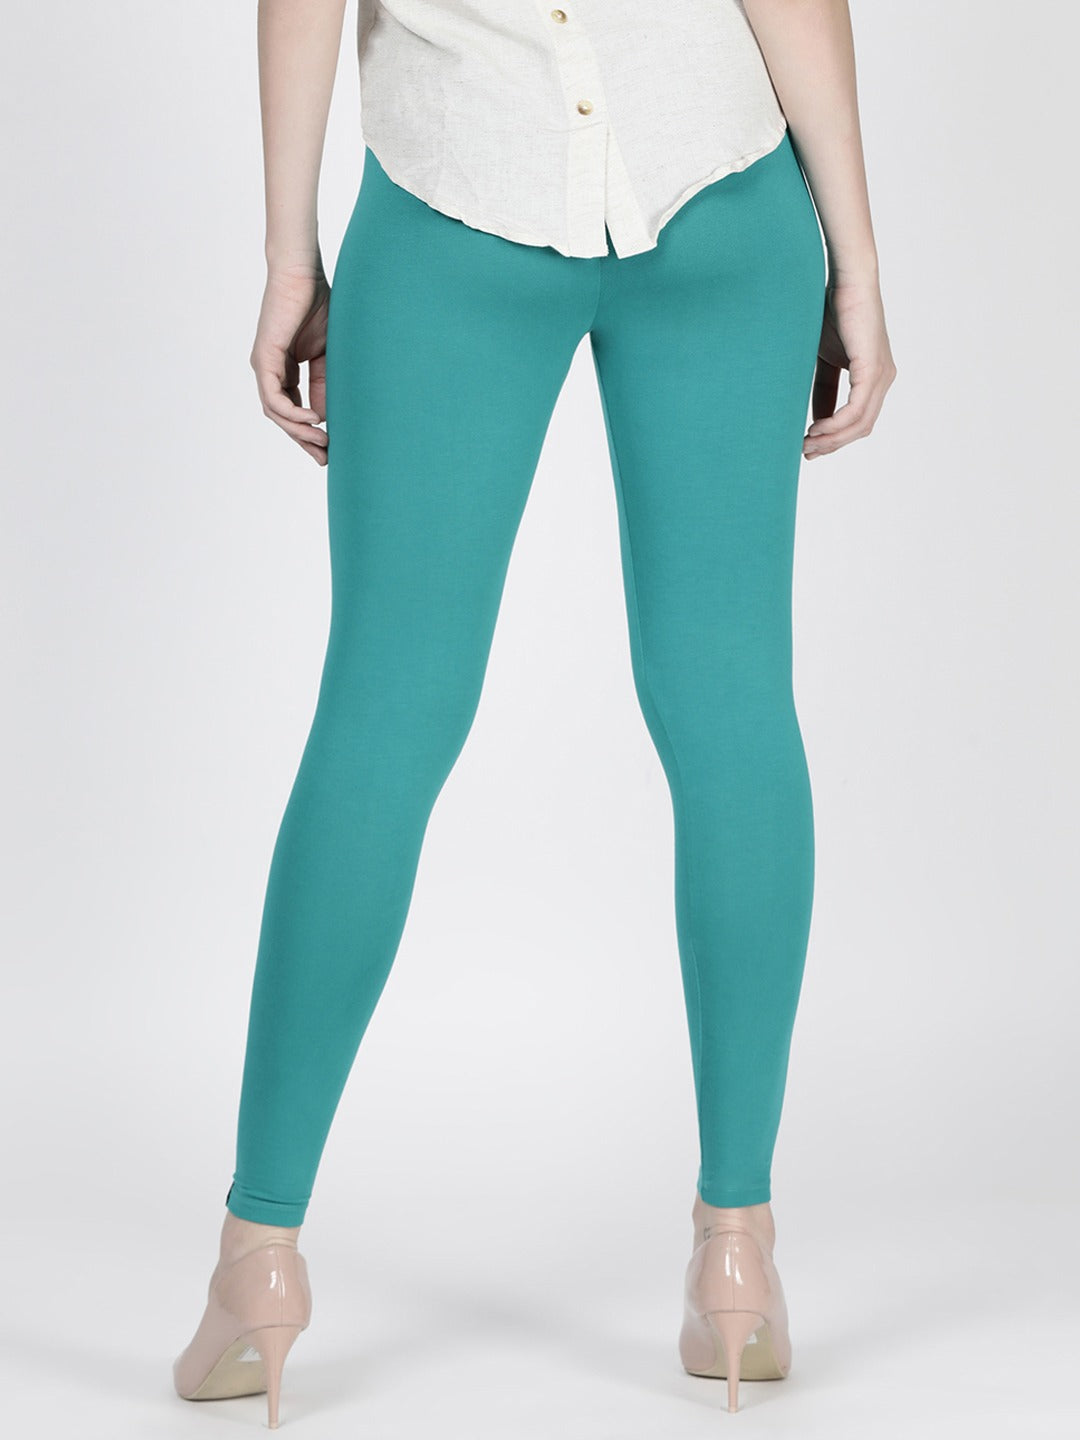 Solid Teal Leggings - Indian Clothing in Denver, CO, Aurora, CO, Boulder, CO, Fort Collins, CO, Colorado Springs, CO, Parker, CO, Highlands Ranch, CO, Cherry Creek, CO, Centennial, CO, and Longmont, CO. Nationwide shipping USA - India Fashion X